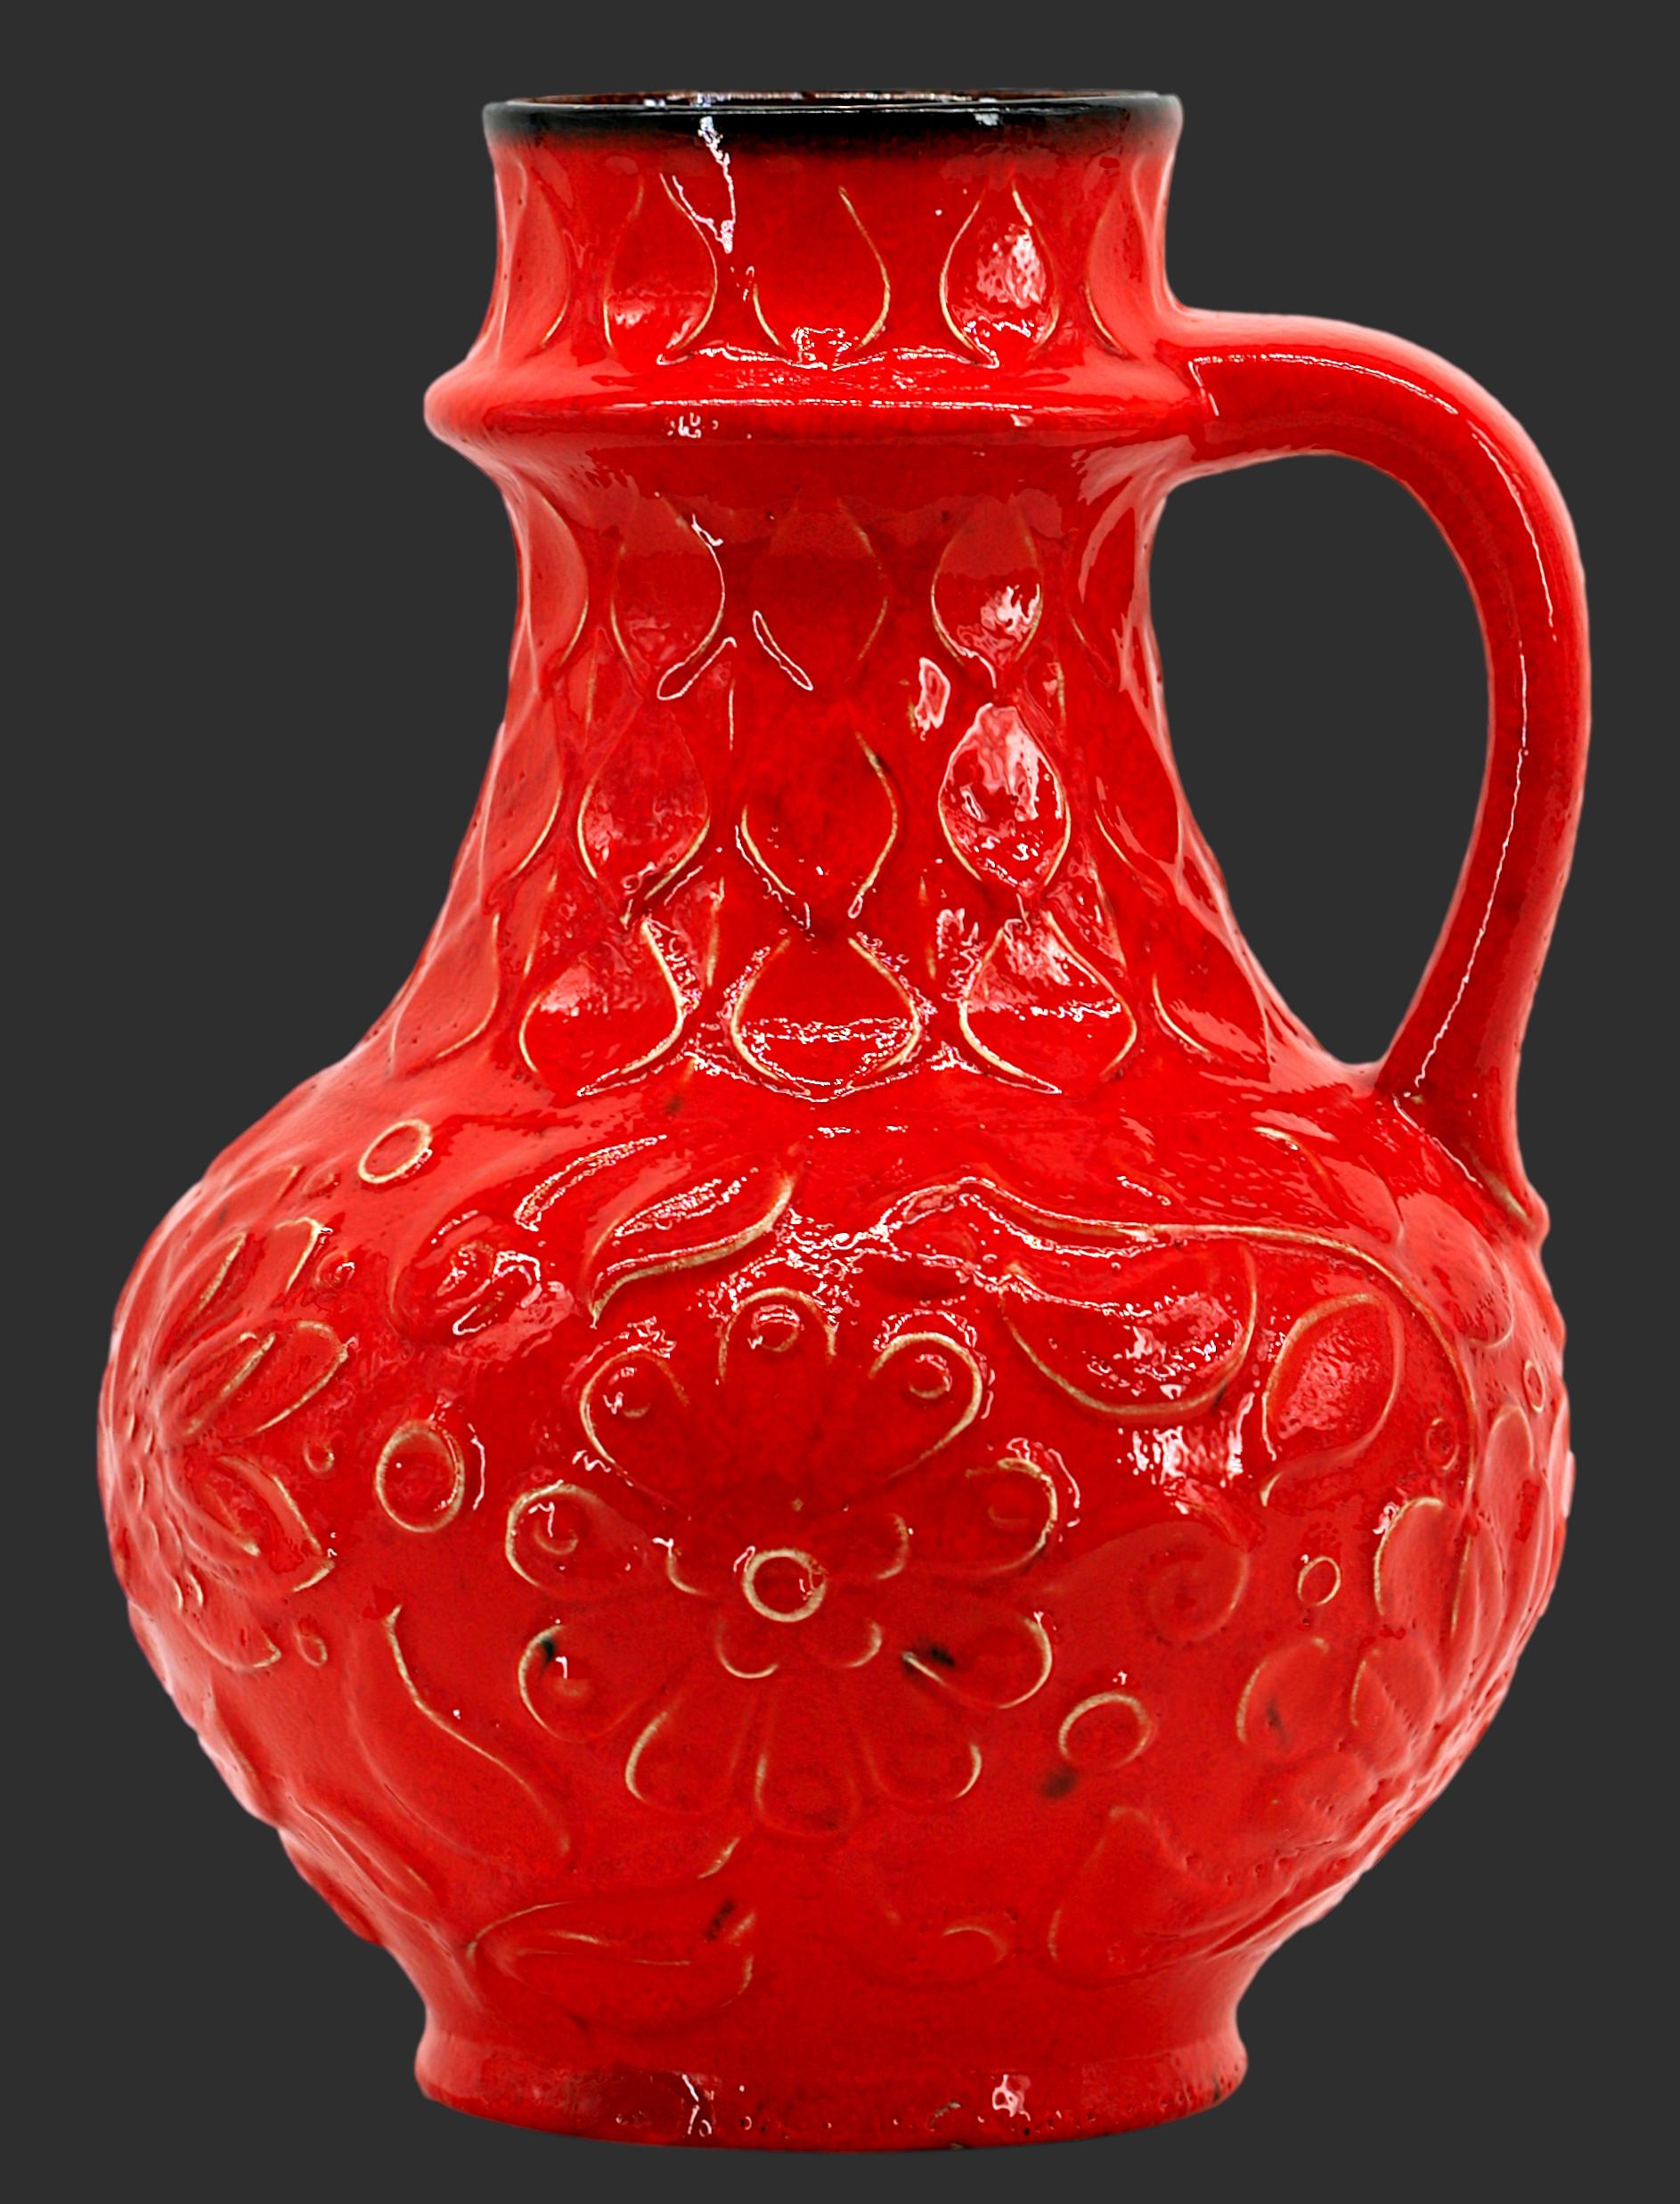 German Mid-century ceramic vase, Germany, 1950s. Vase with a handle. Fantastic red color on a cameo floral decoration typical of the 50s. Height : 30cm - 11.8 in. , Diameter : 22cm - 8.7 in. Marked 